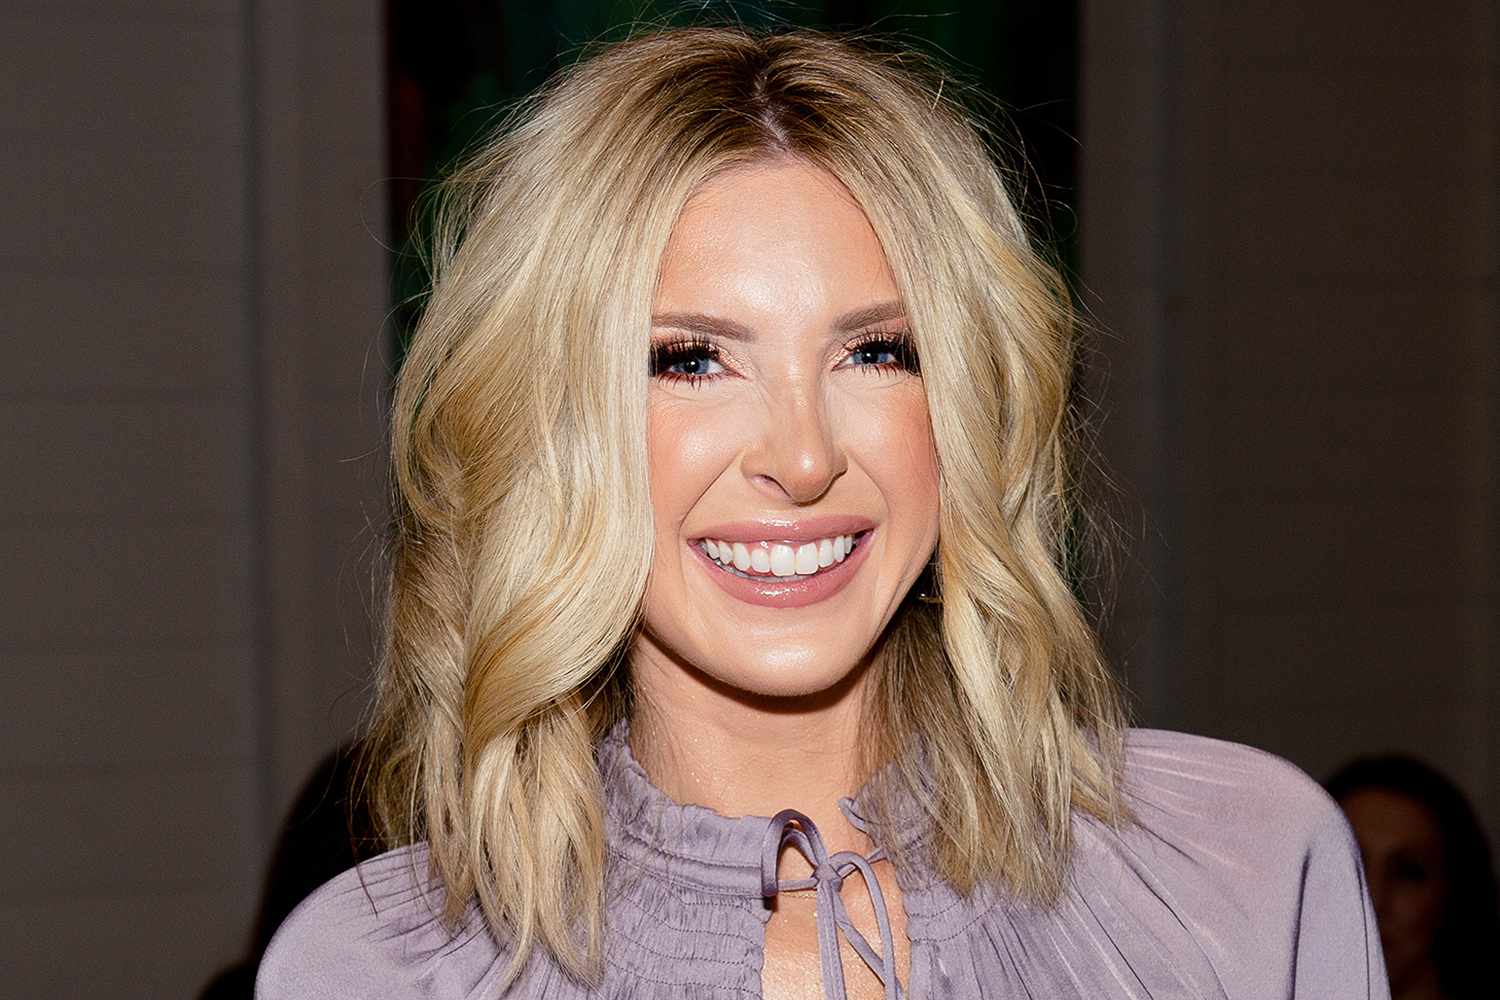 Lindsie Chrisley Says She's Learned with Age That 'Your Family Is Who You Choose' amid Ongoing Estrangement